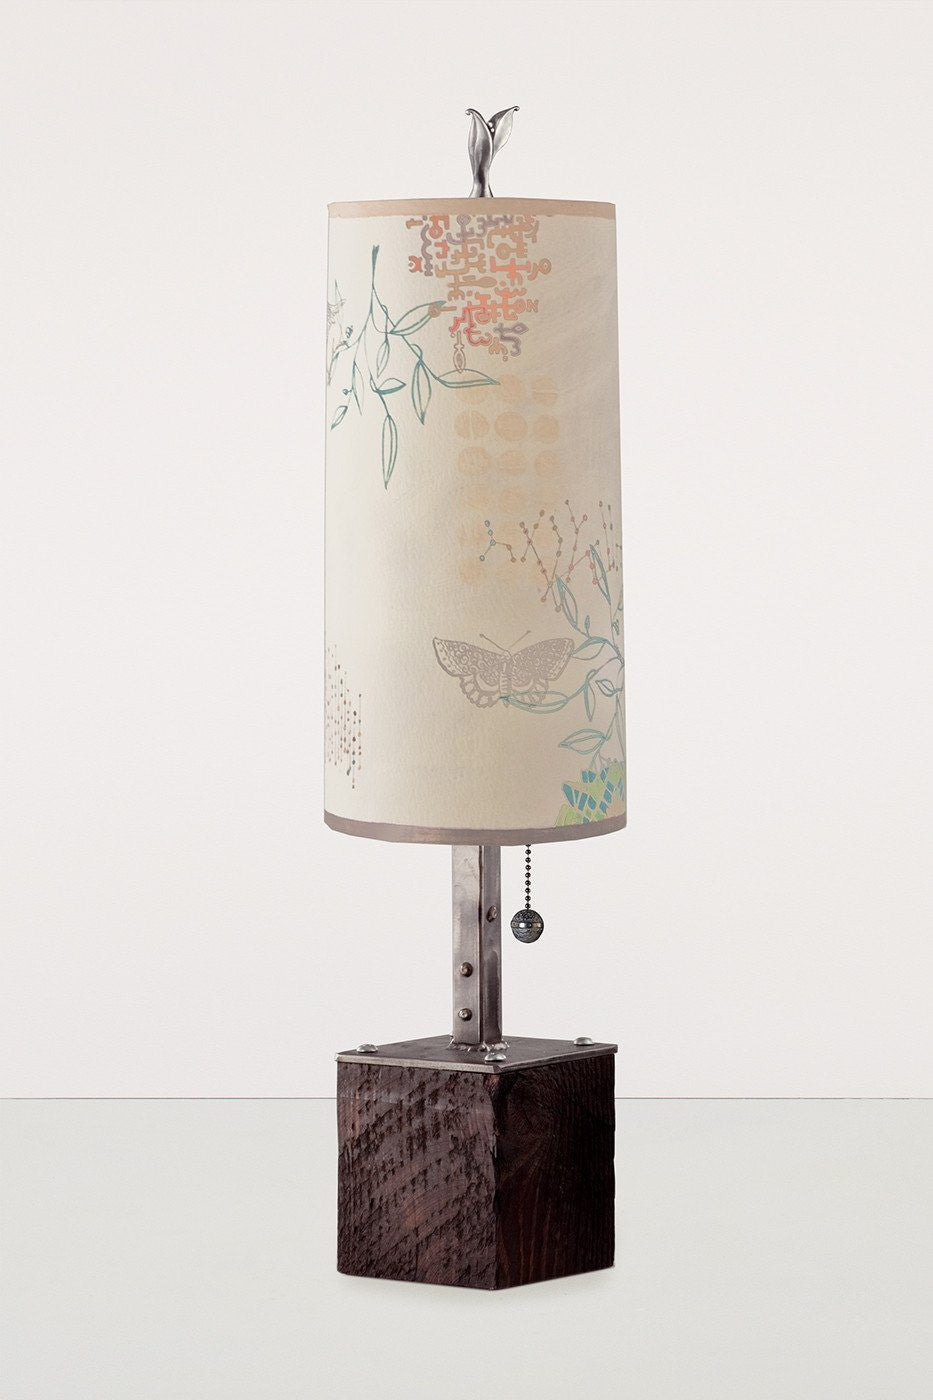 Janna Ugone &amp; Co Table Lamps Steel Table Lamp on Reclaimed Wood with Small Tube Shade in Ecru Journey